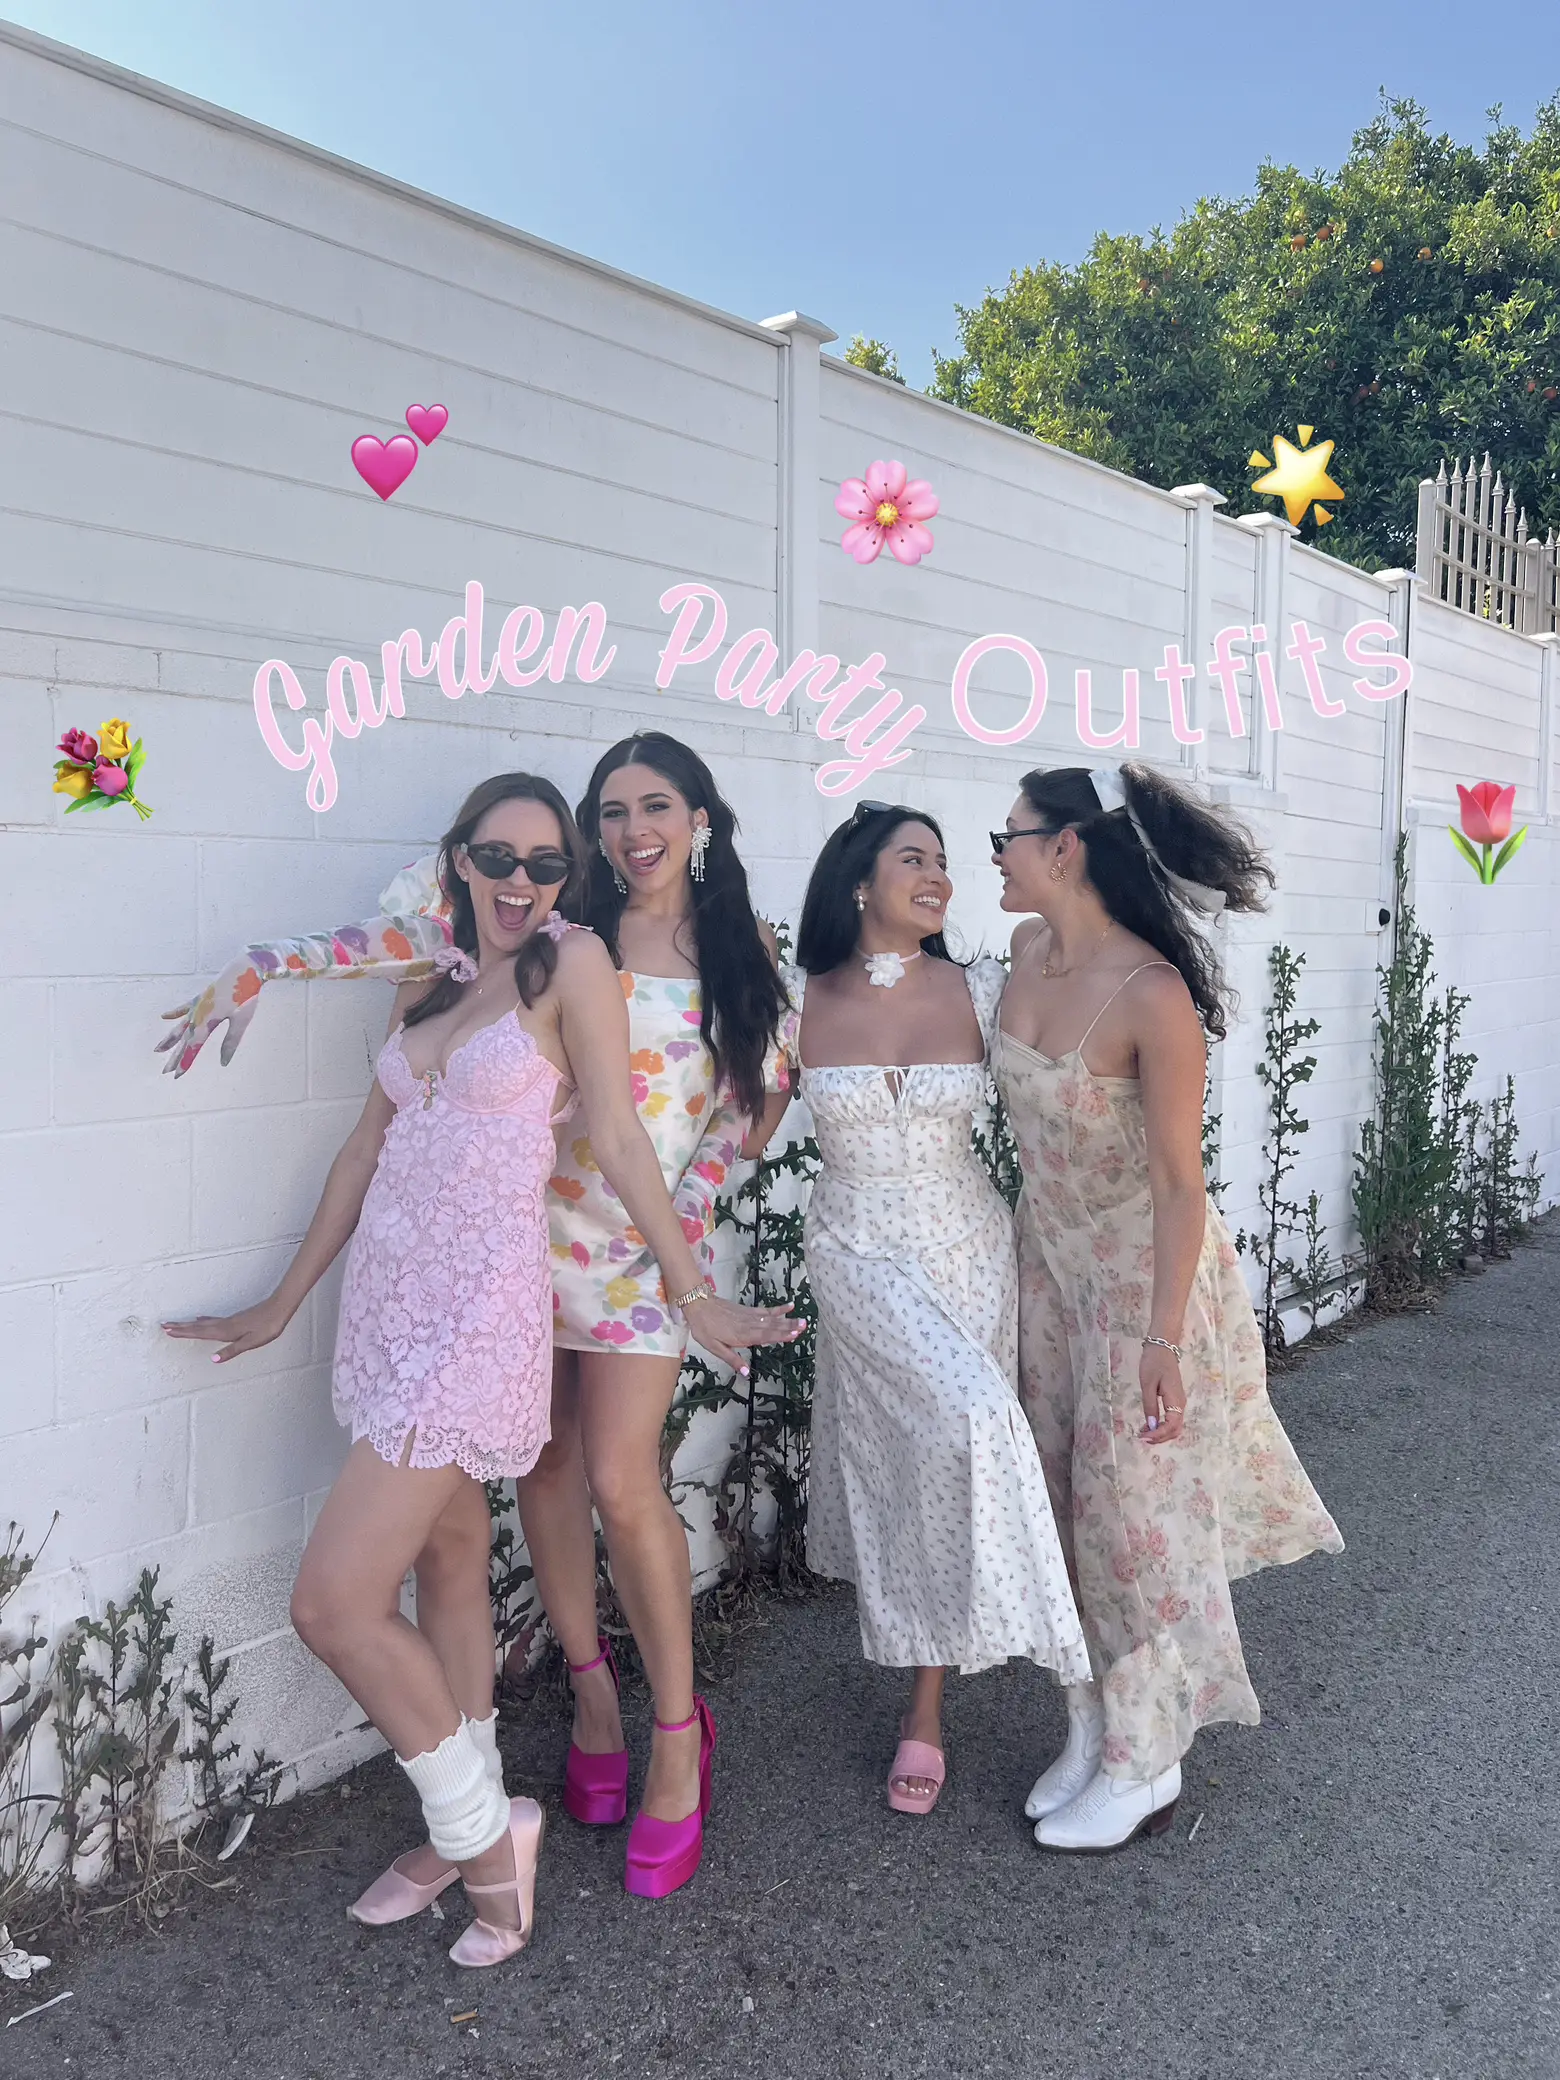 Garden Party Outfit Ideas, Gallery posted by Esther Lane